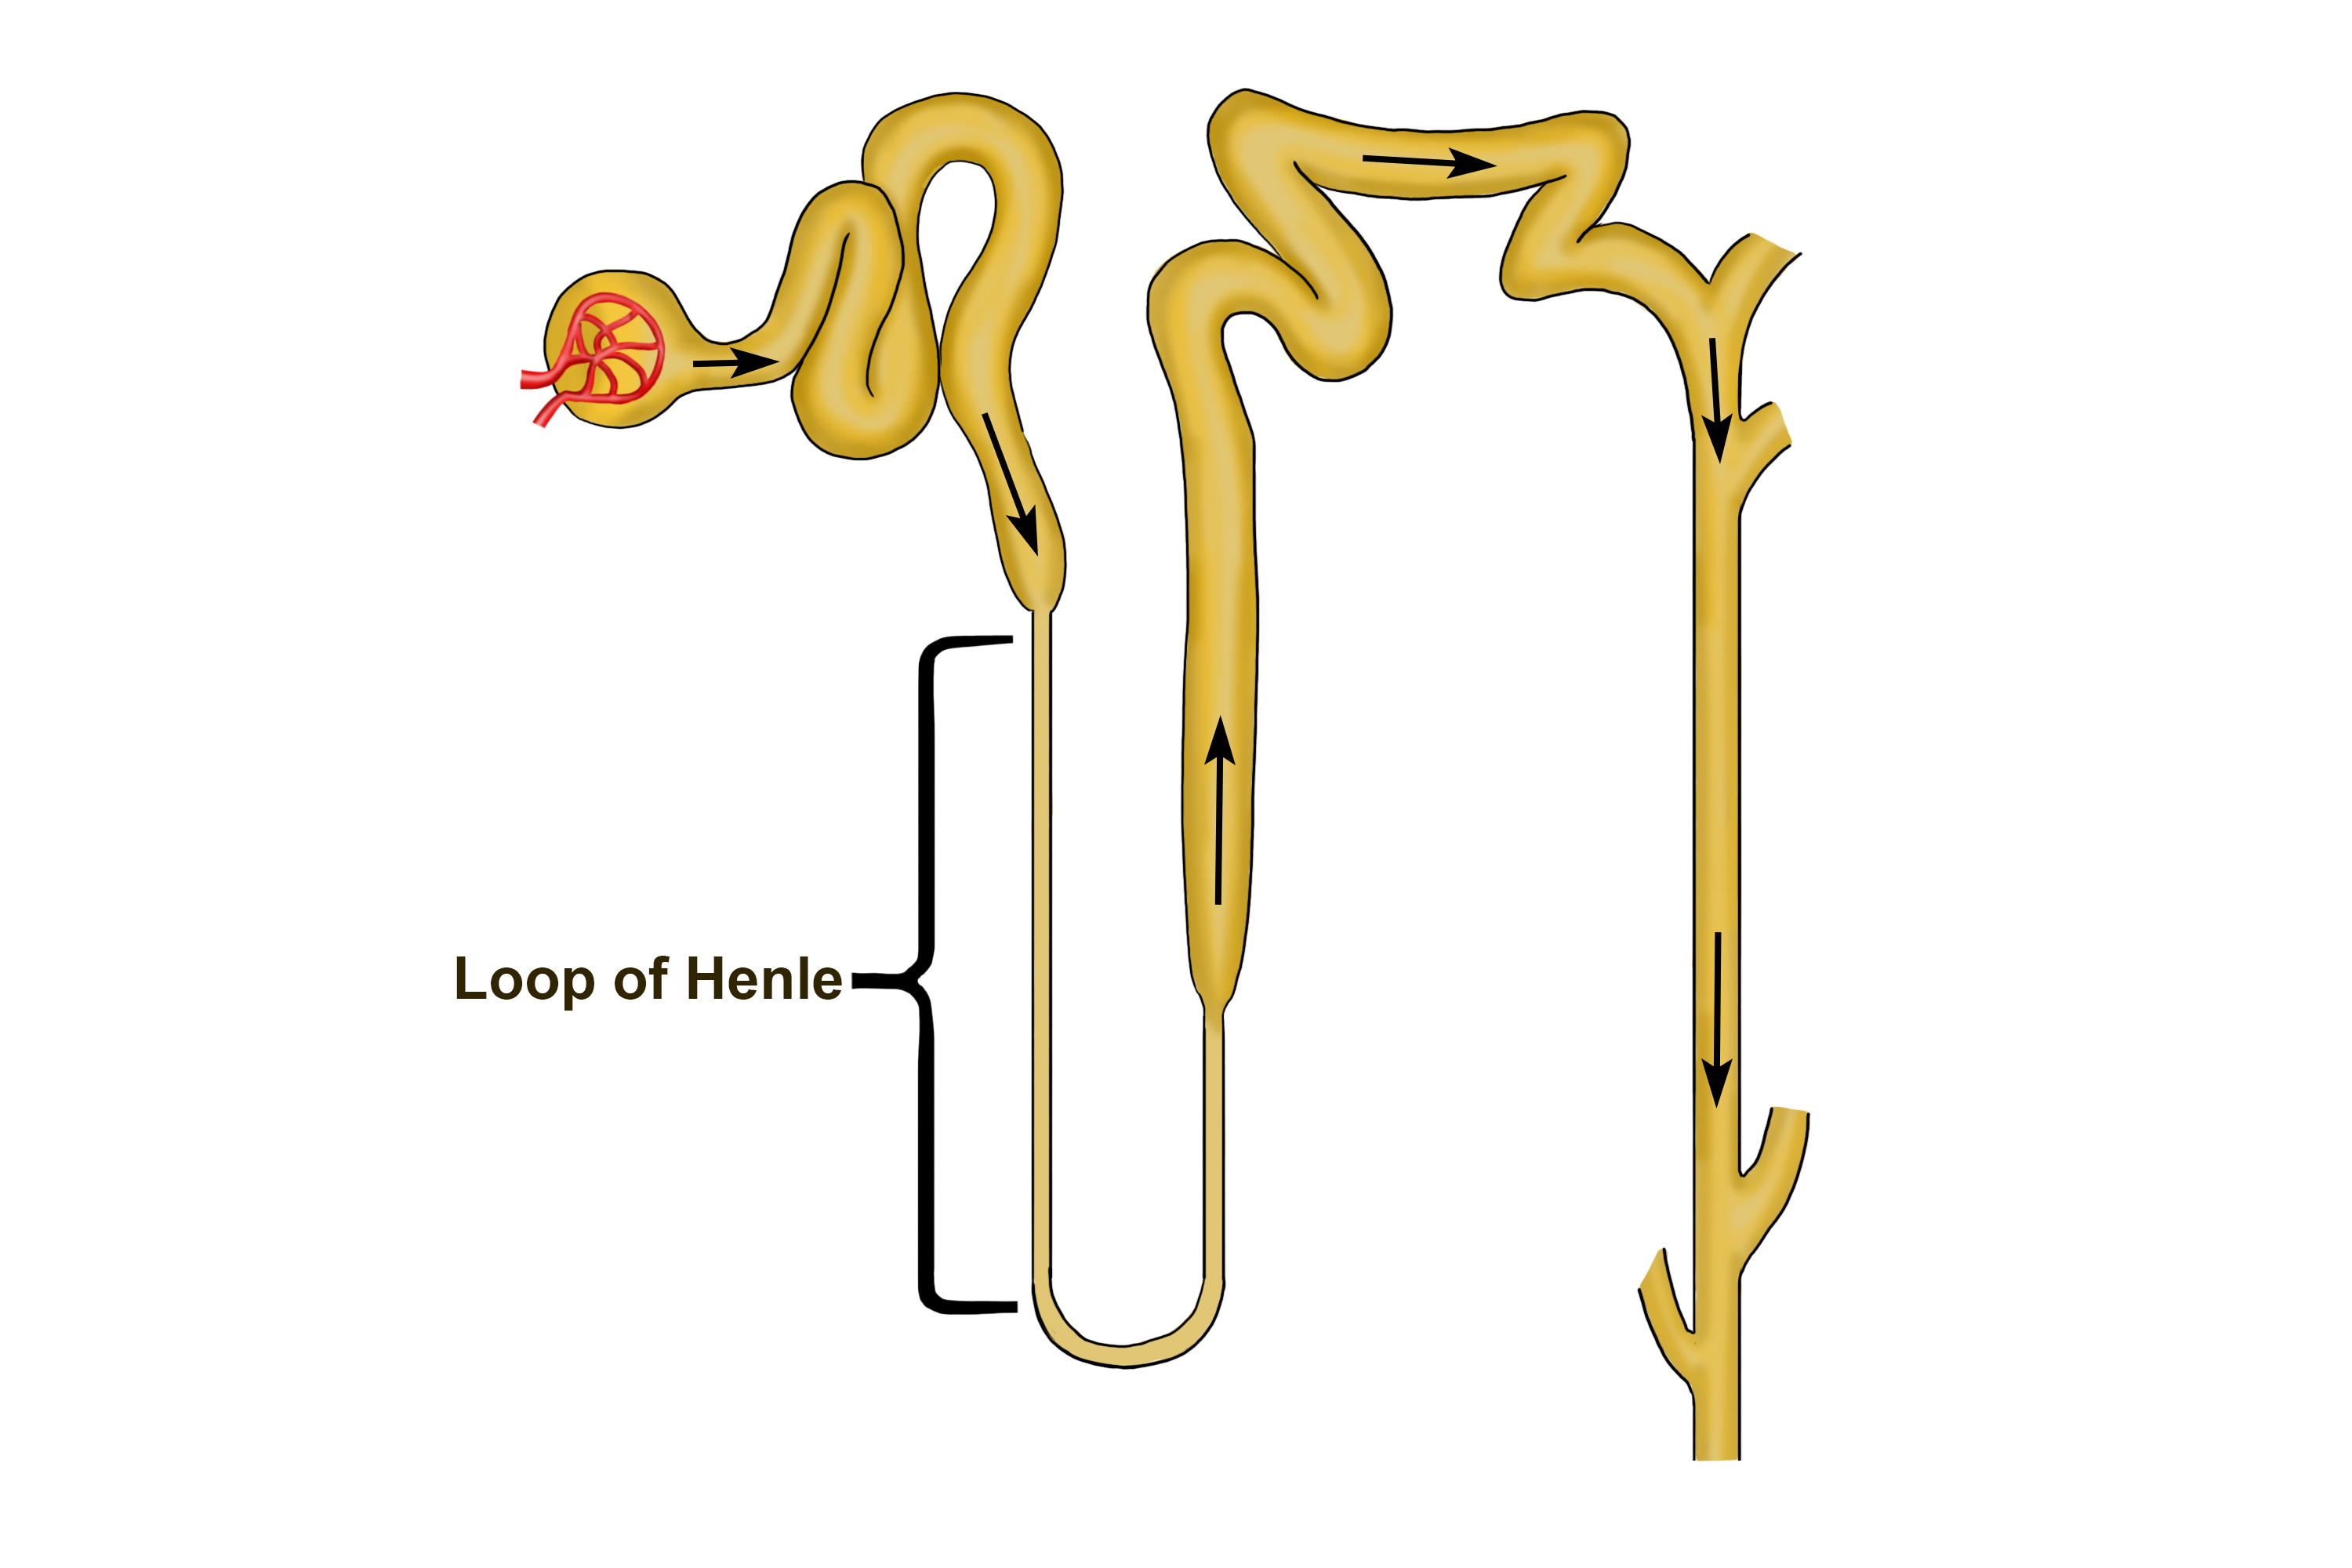 The Henle loop is where substances from the previous bends are reabsorbed back into the blood stream